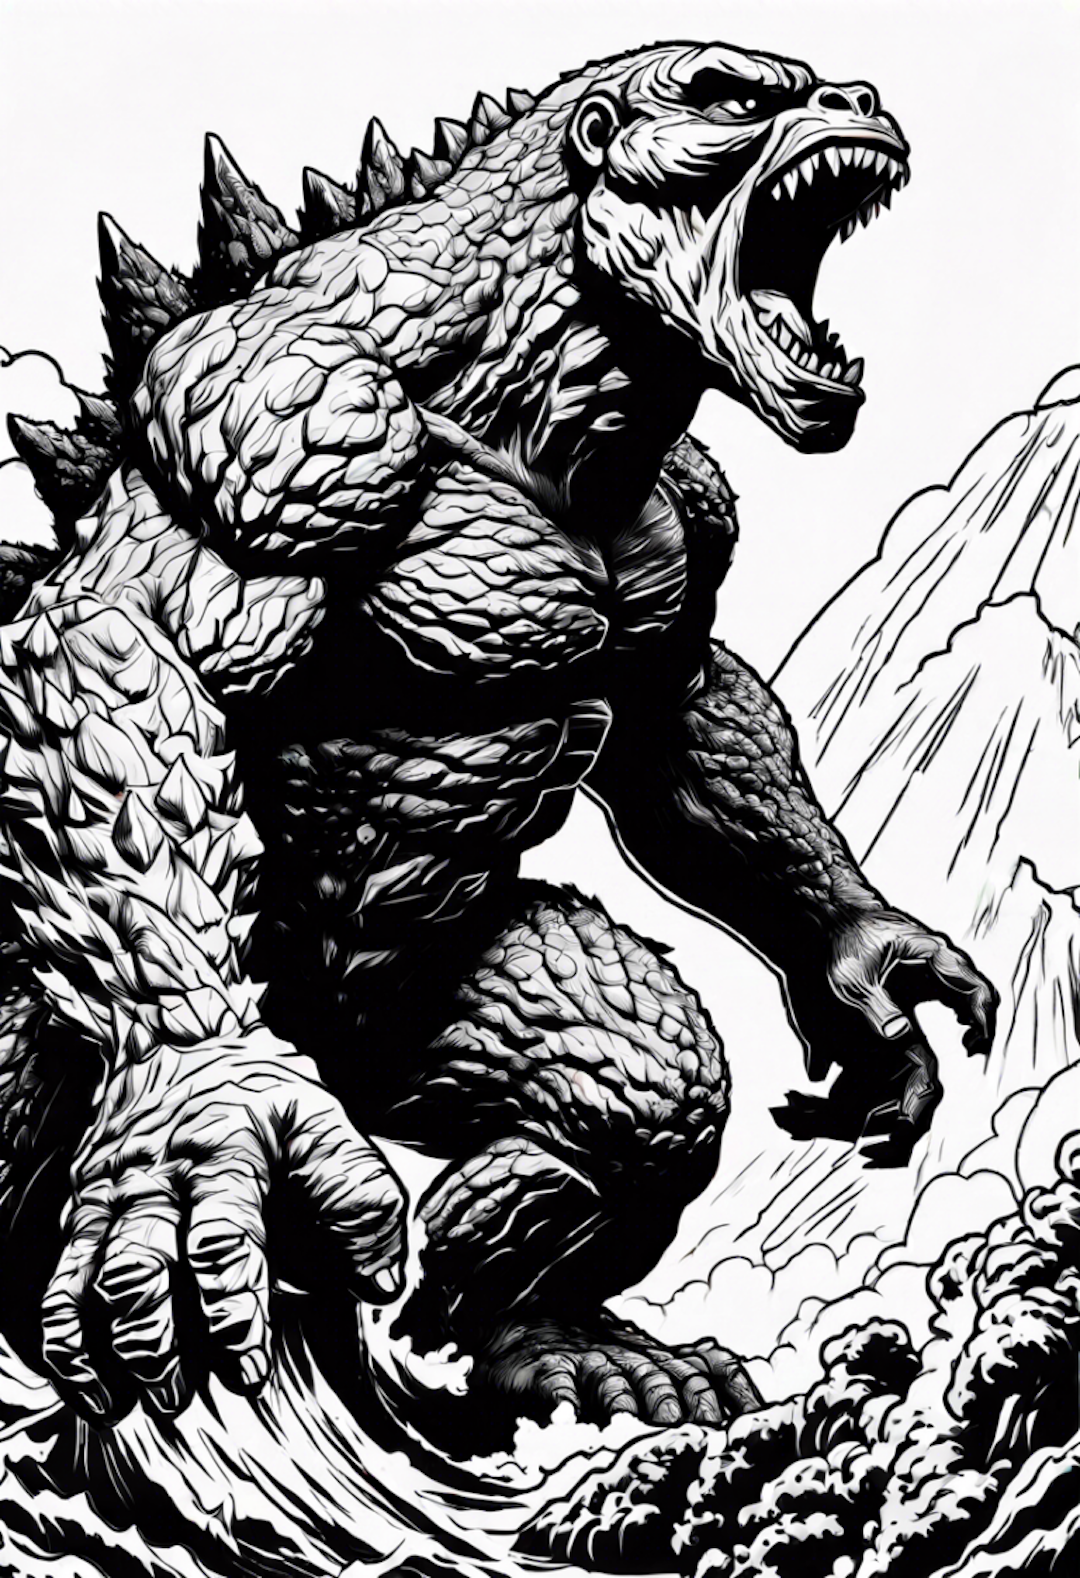 Godzilla Roars Over Mountains Coloring Page coloring pages